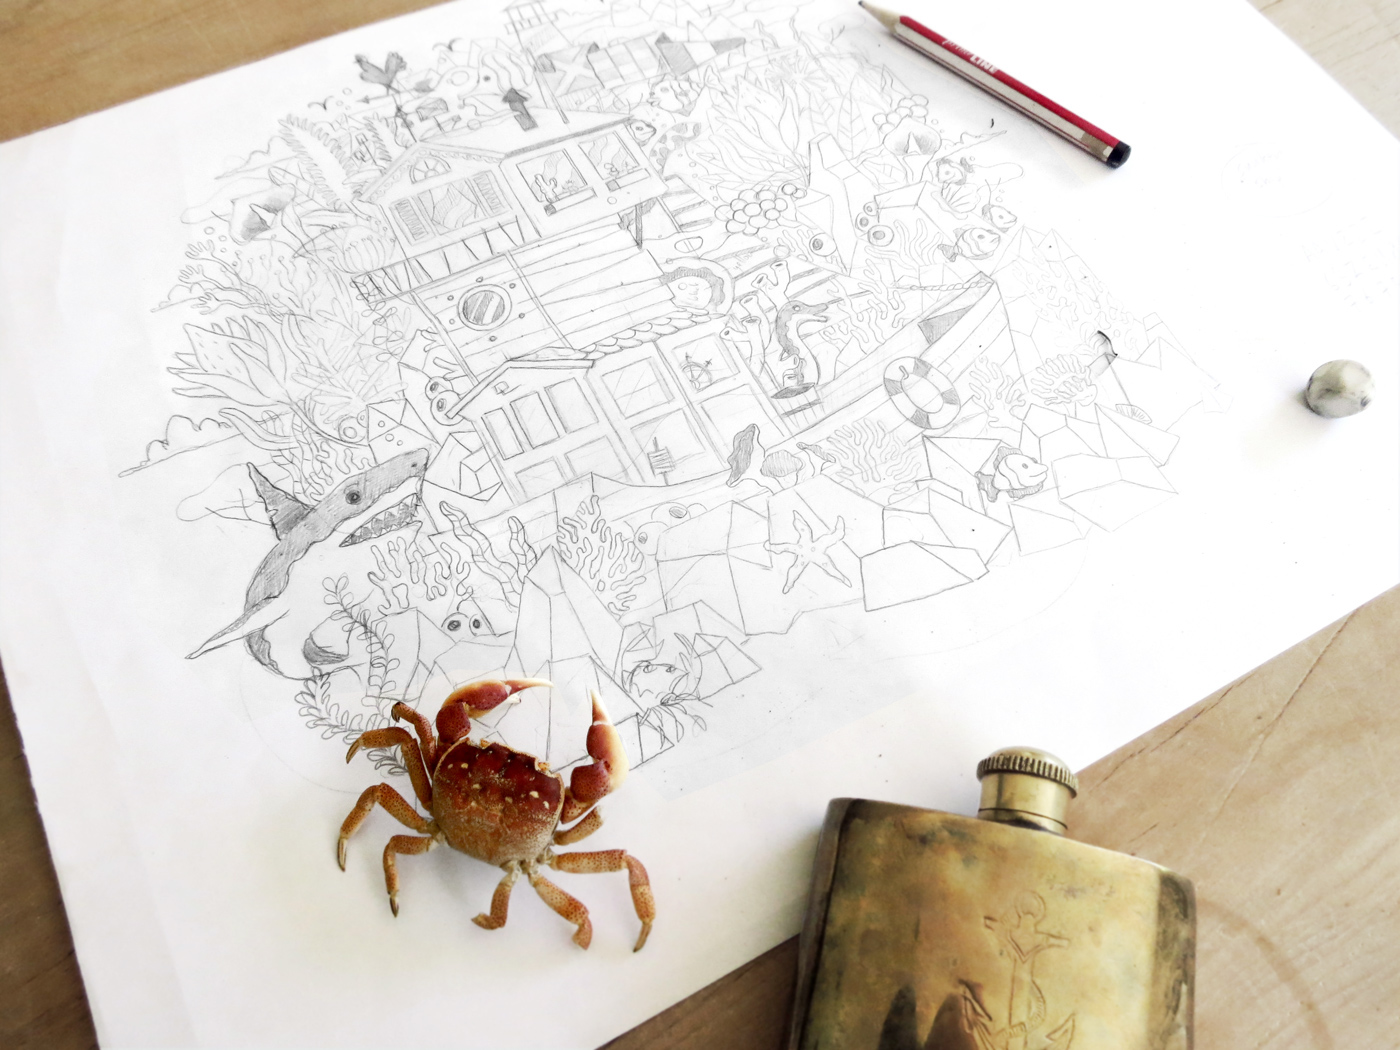 Process pencil sketches on paper with nature and underwater sunken ship and ocean wildlife and fish.